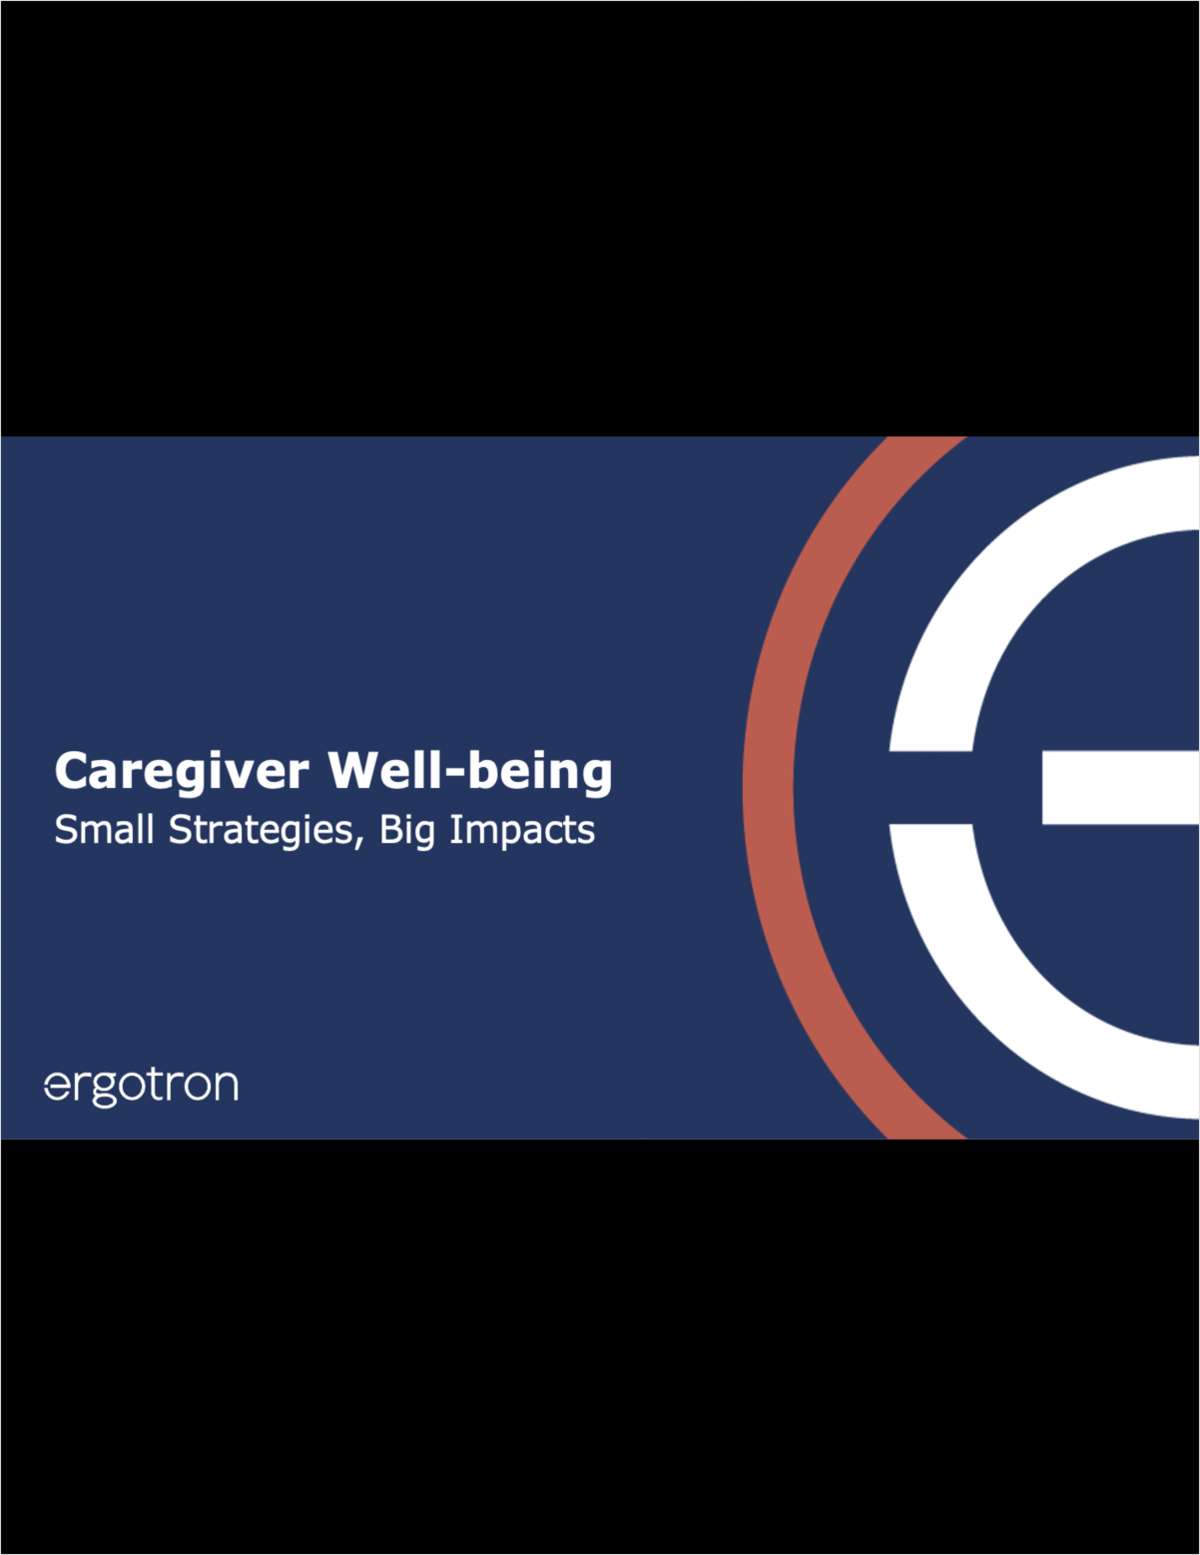 Caregiver Well-Being